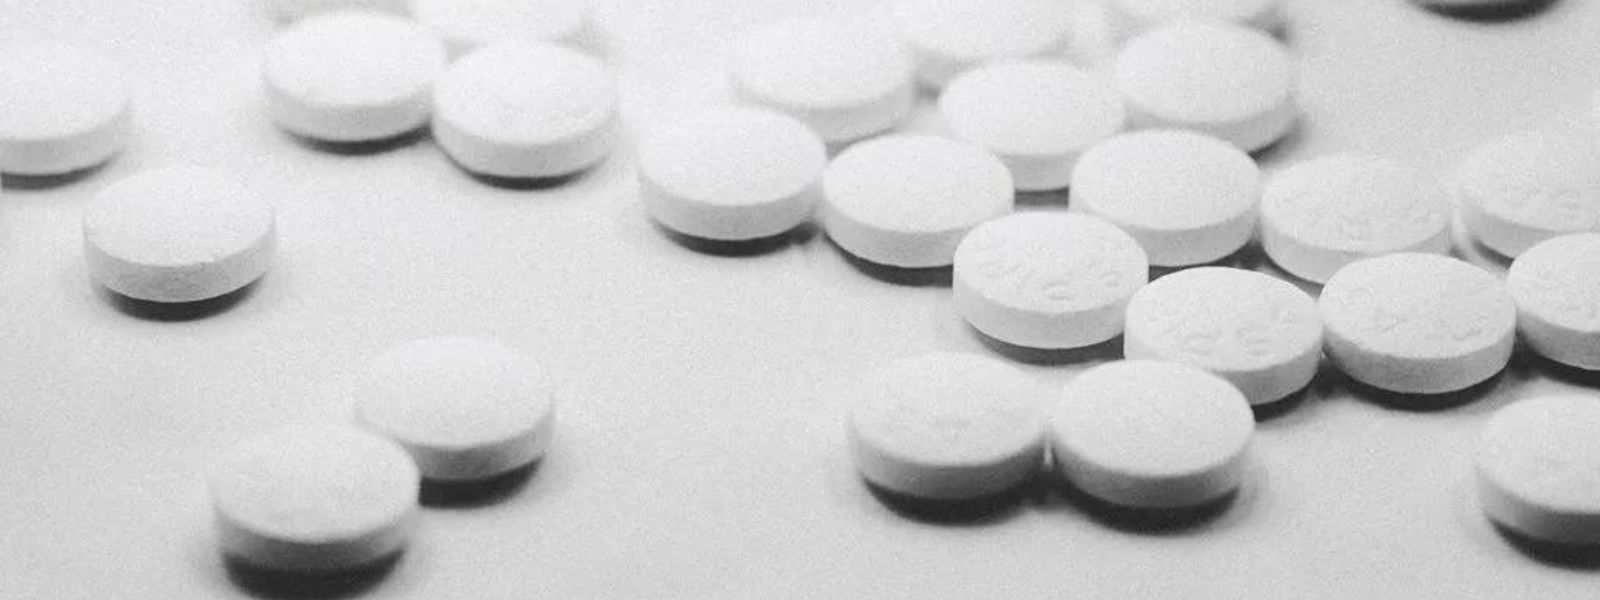 Health Minister calls for removal of Aspirin